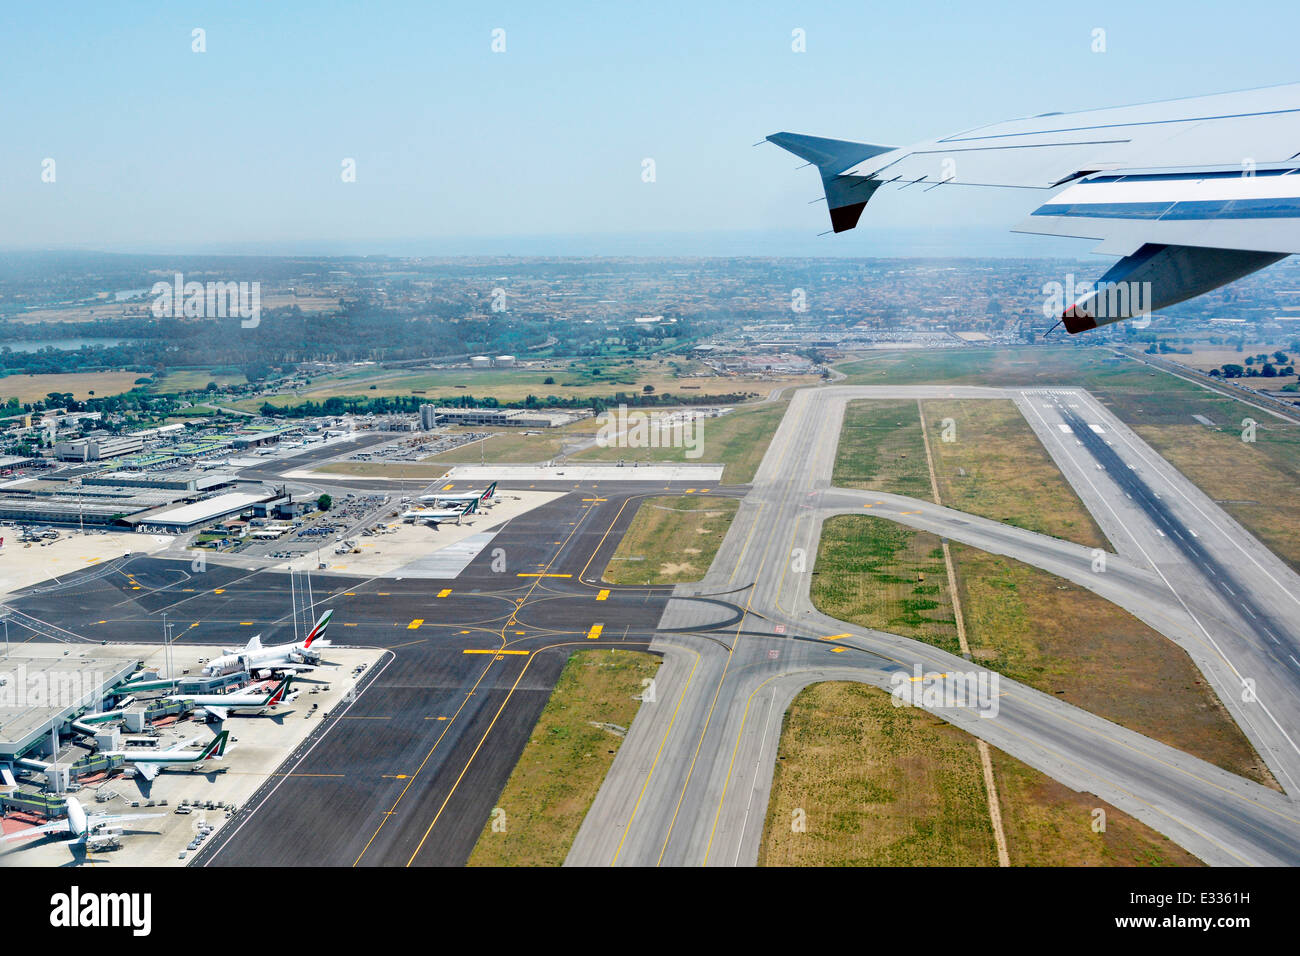 Plane taking off aerial view of runway & taxiing routes to terminal buildings seen from jet above Italian Rome Fiumicino International Airport Italy Stock Photo